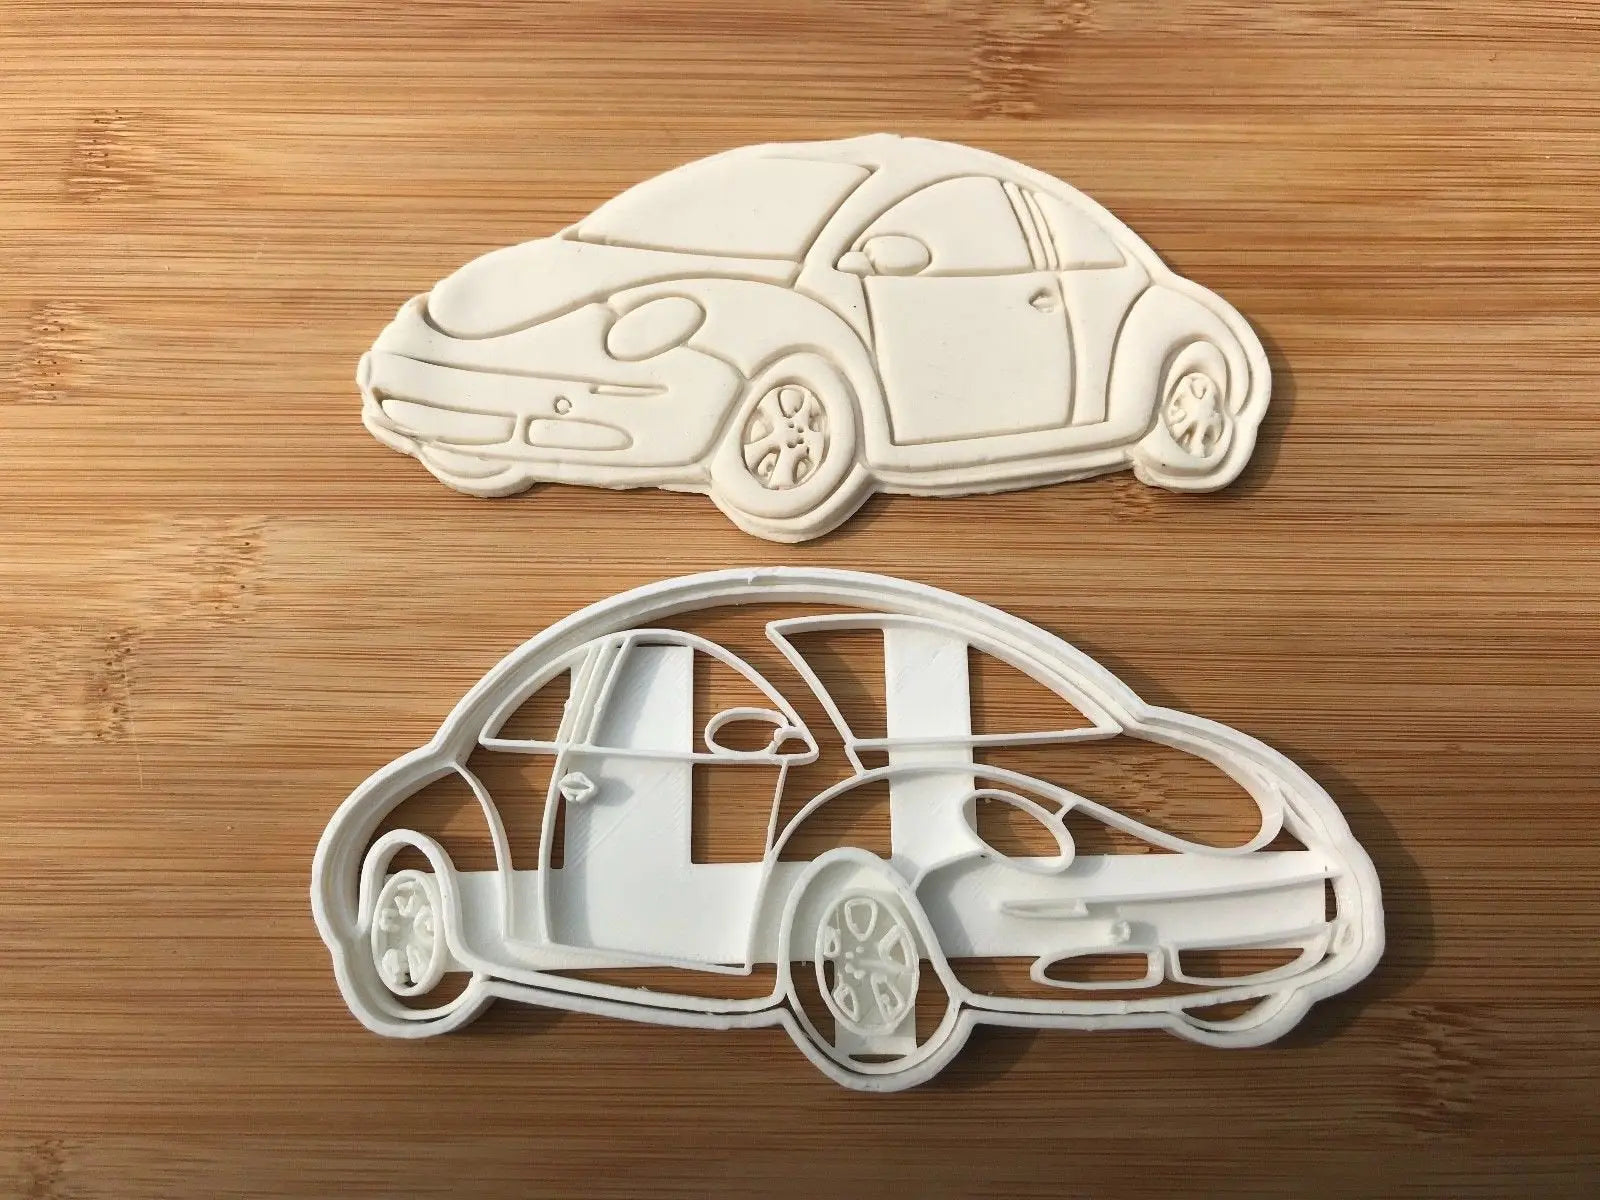 VW-INSPIRED car Side cookie cutters Uk Plastic Cookie Cutter Fondant Cake Decorating MEG cookie cutters